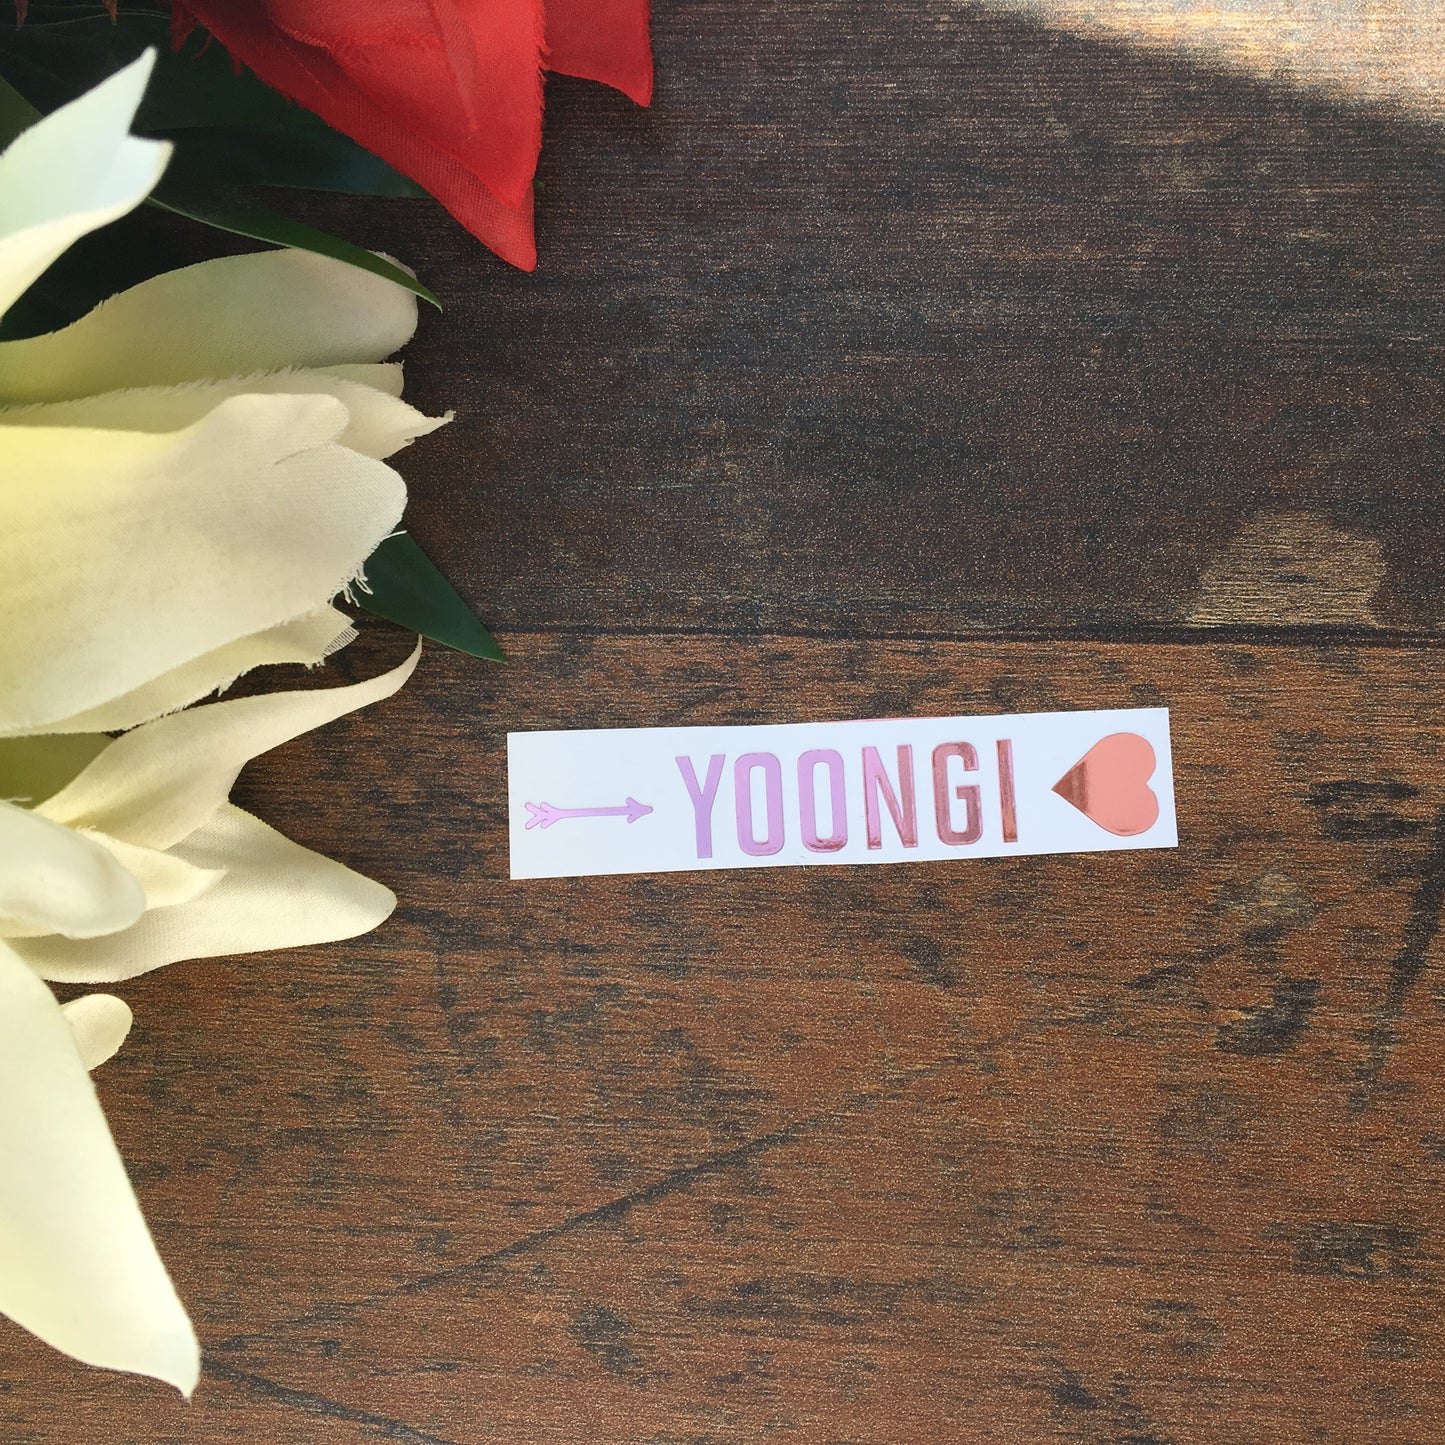 BTS NAME DECAL for Army Bomb